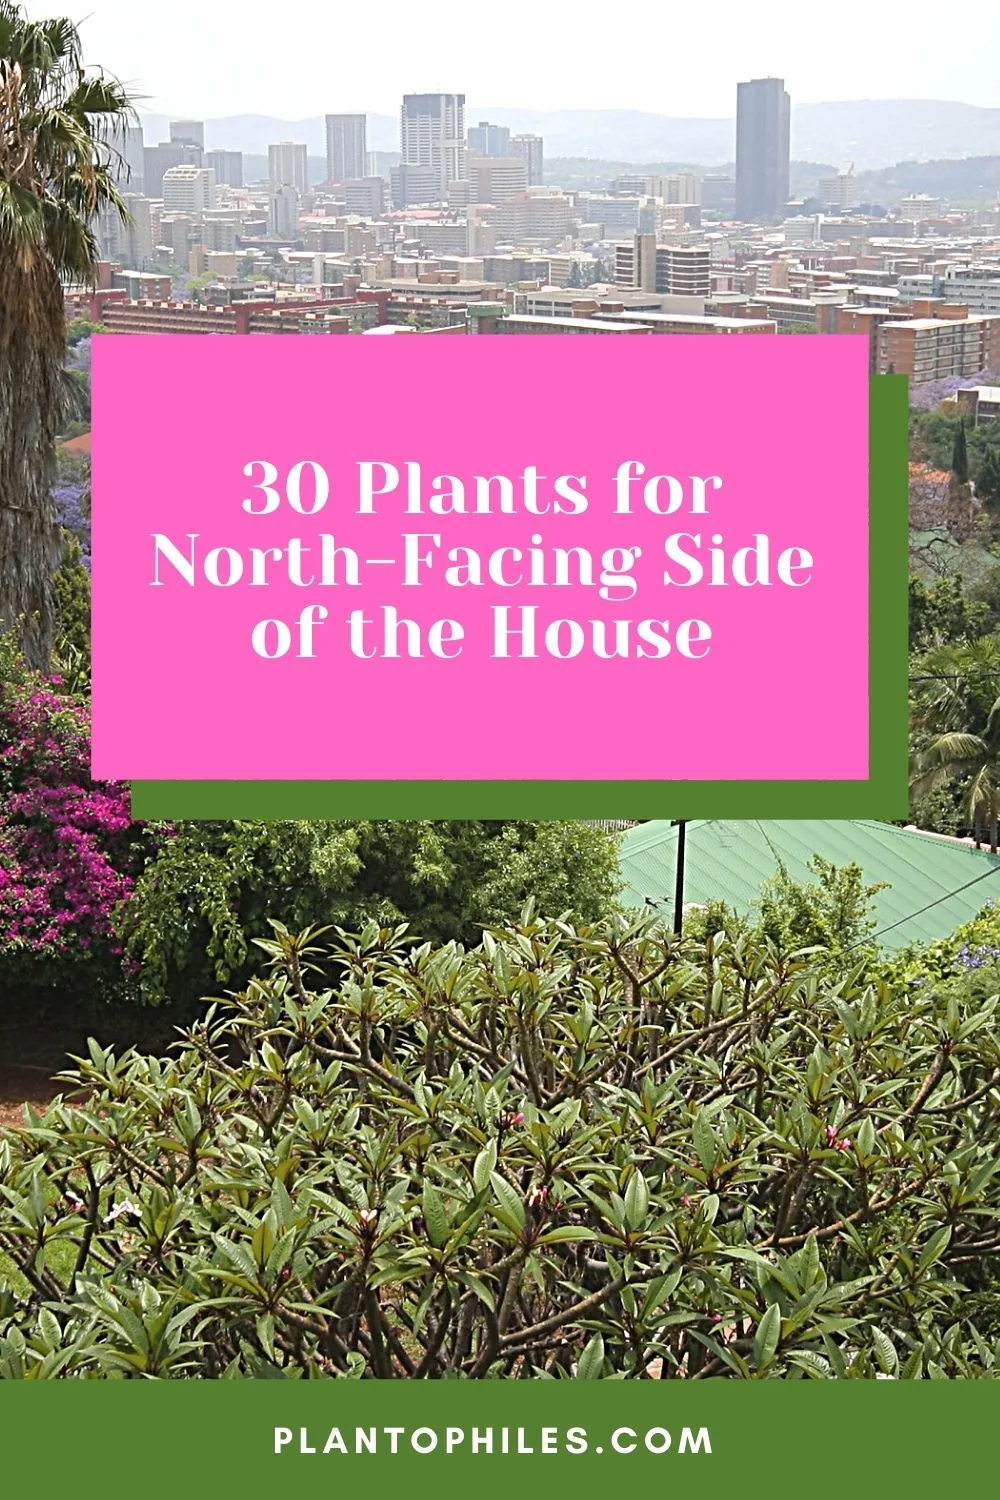 30 Plants for North-Facing Side of the House